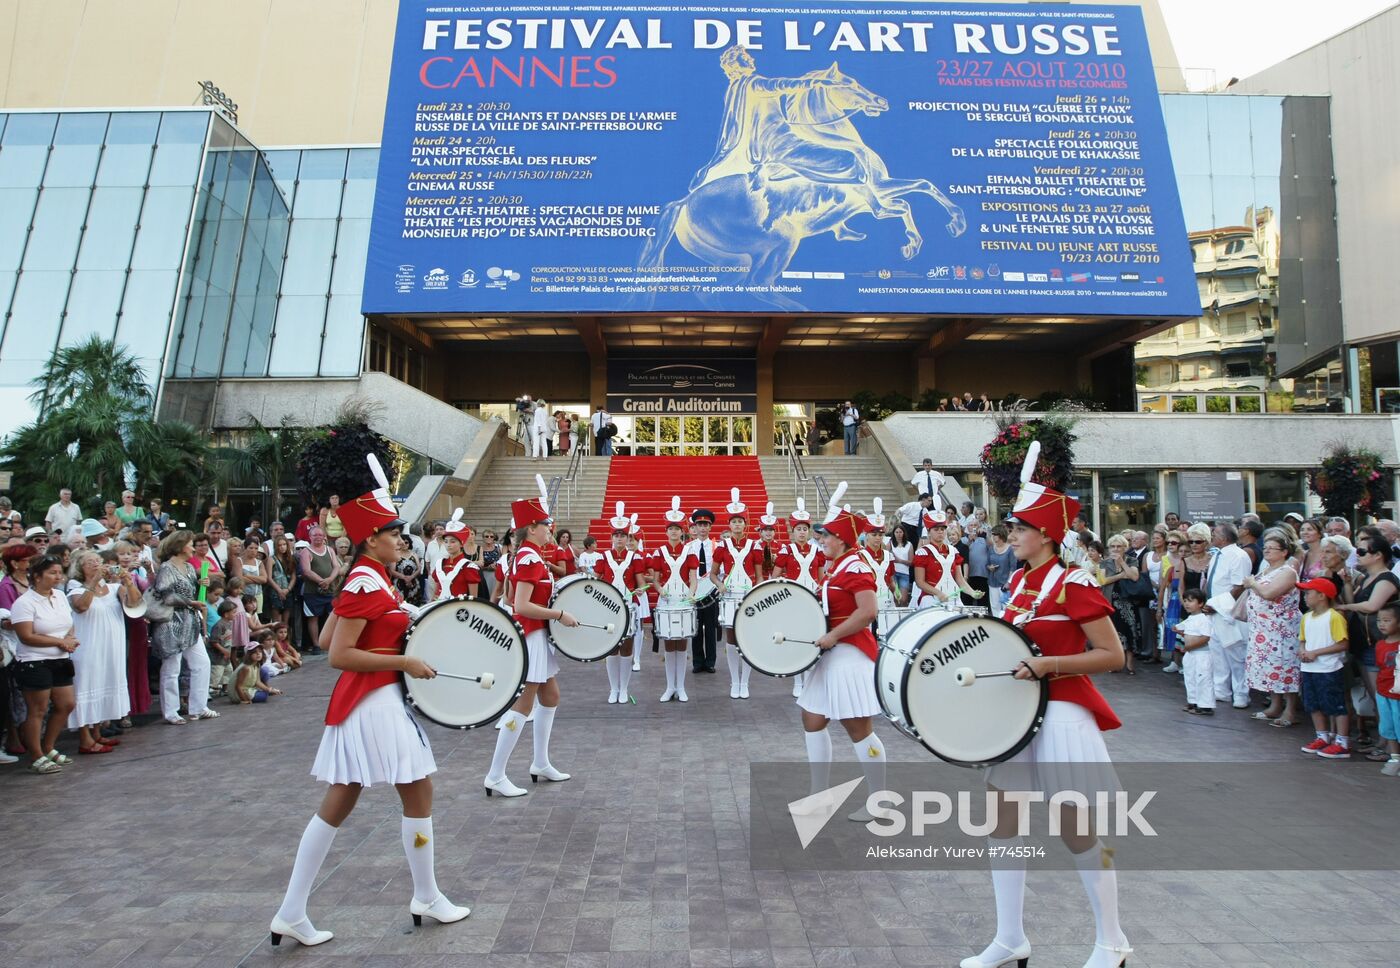 Drummers perform at opening of Russian Art Festival